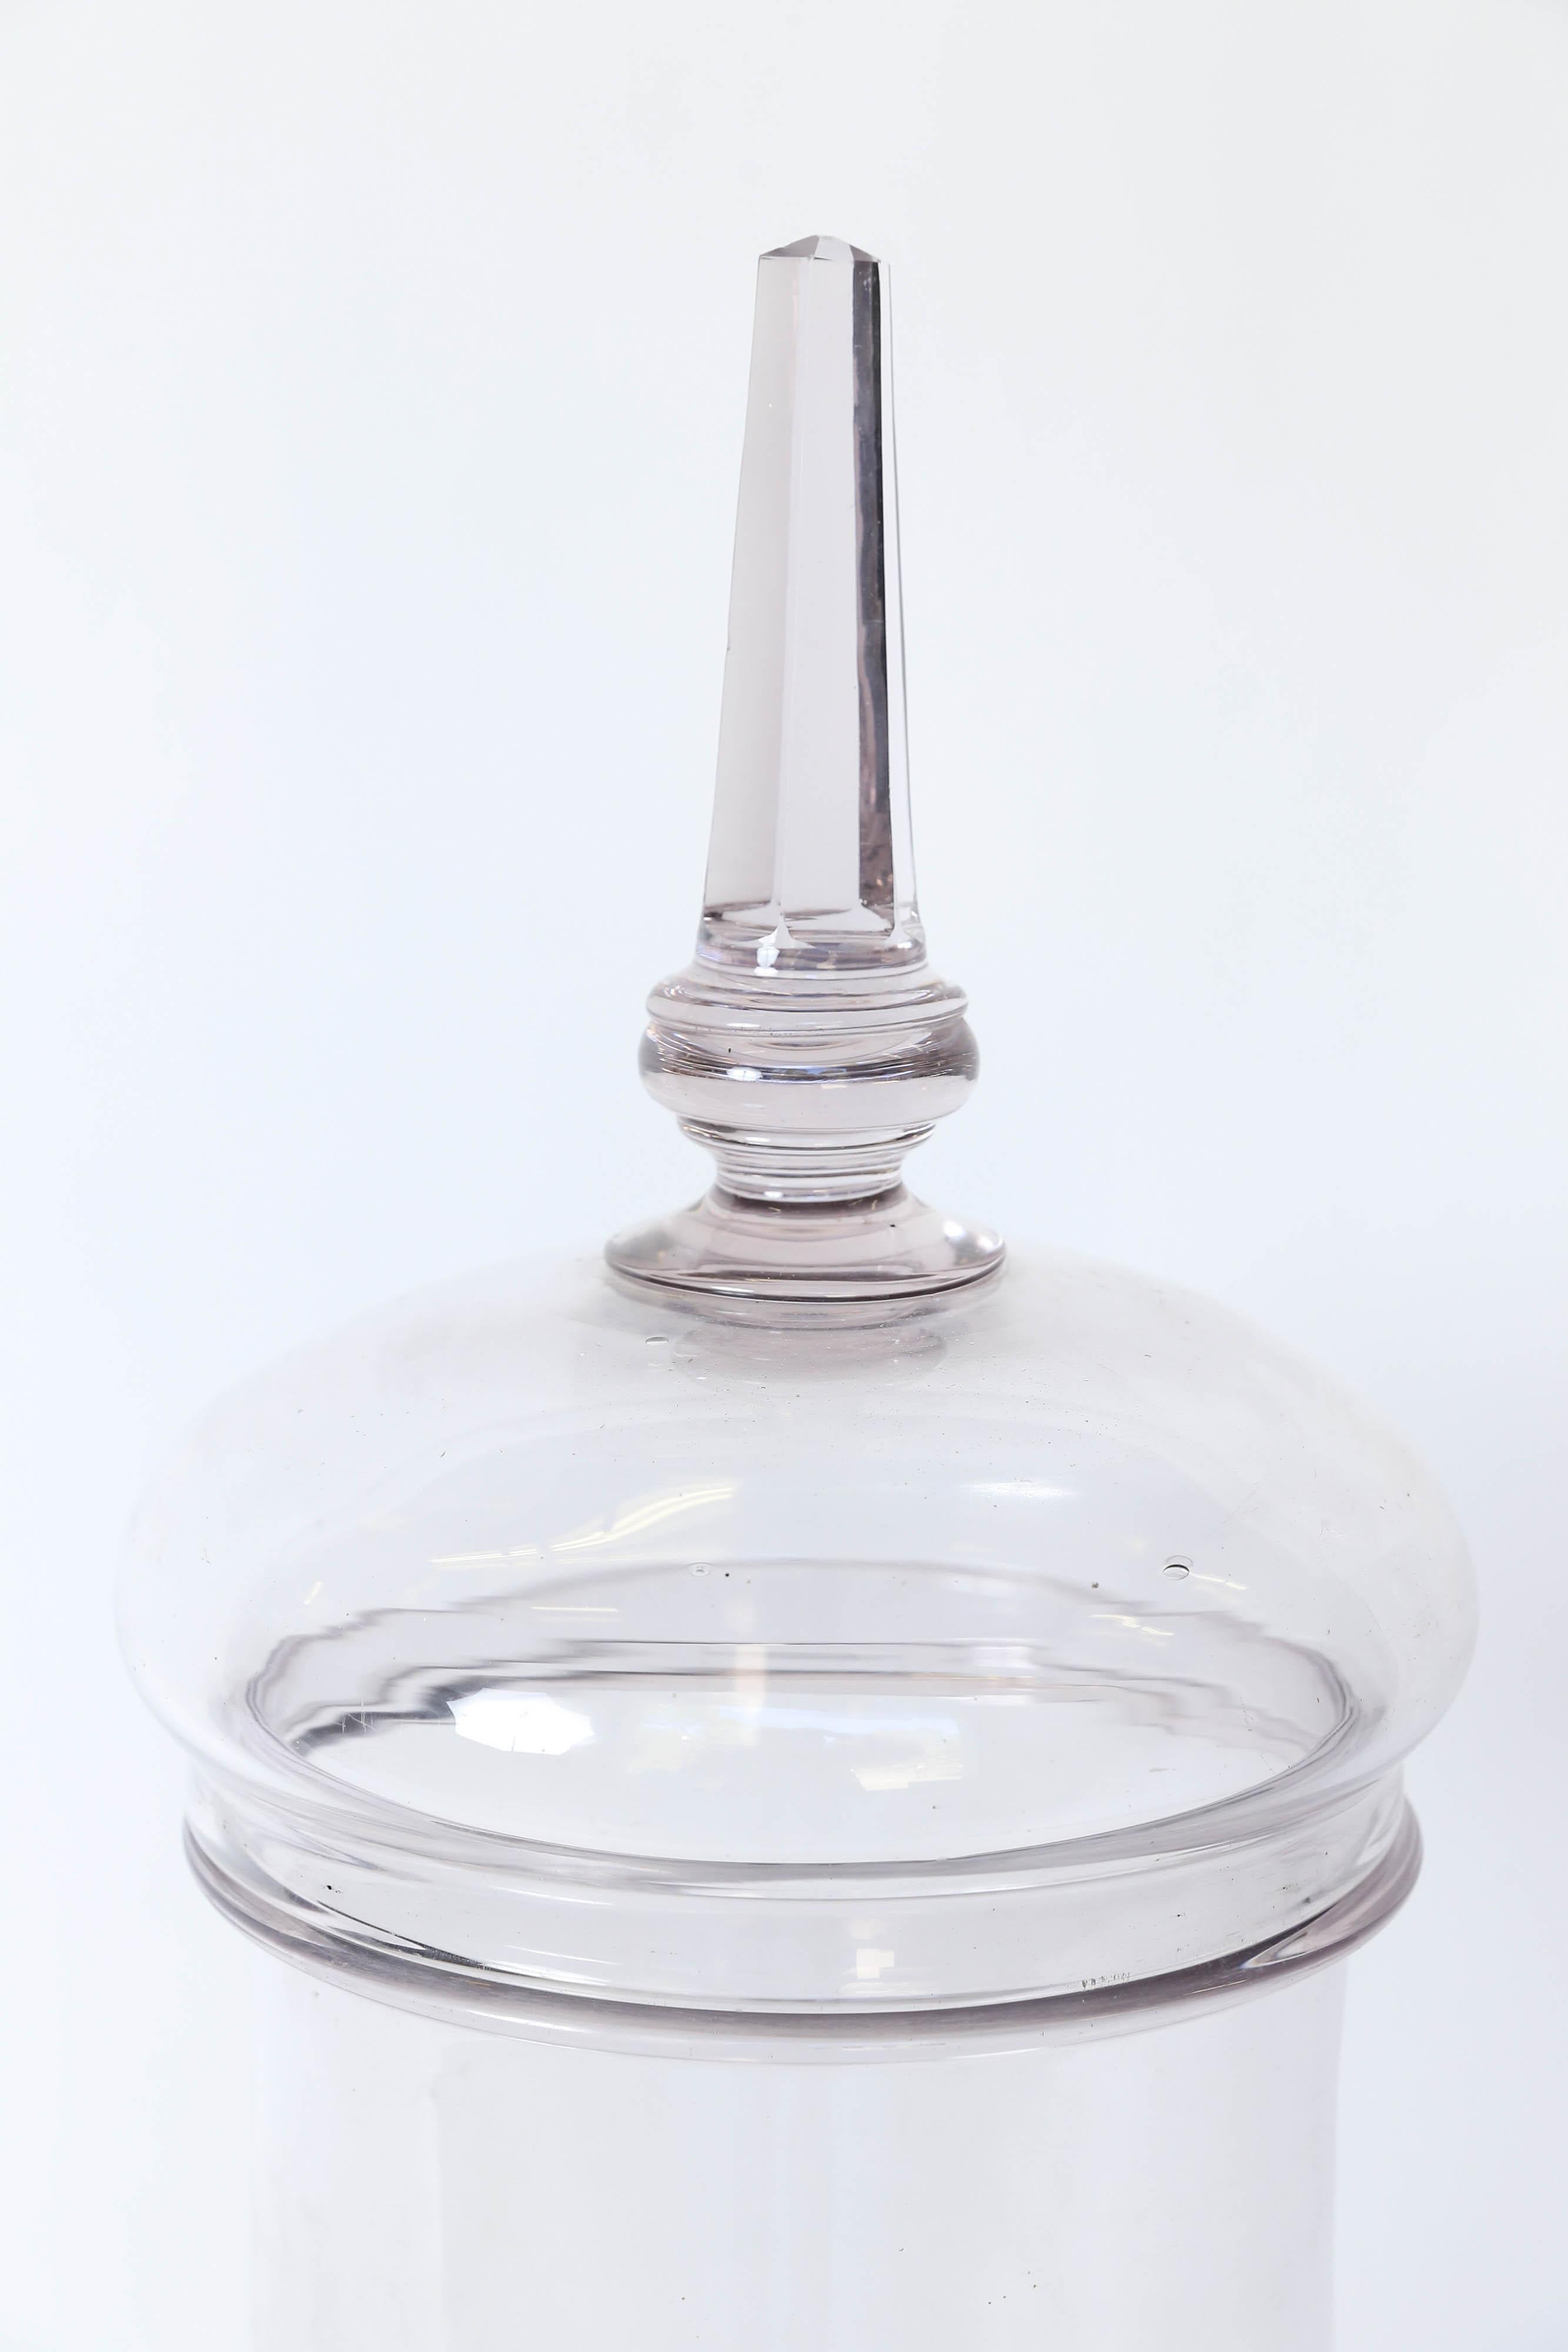 Beautiful glass French bon bon jar with a lavender tint. These jars were used in France either in confiserie shops to display candy or pharmacies to display medicinal products. A lovely addition to your home.